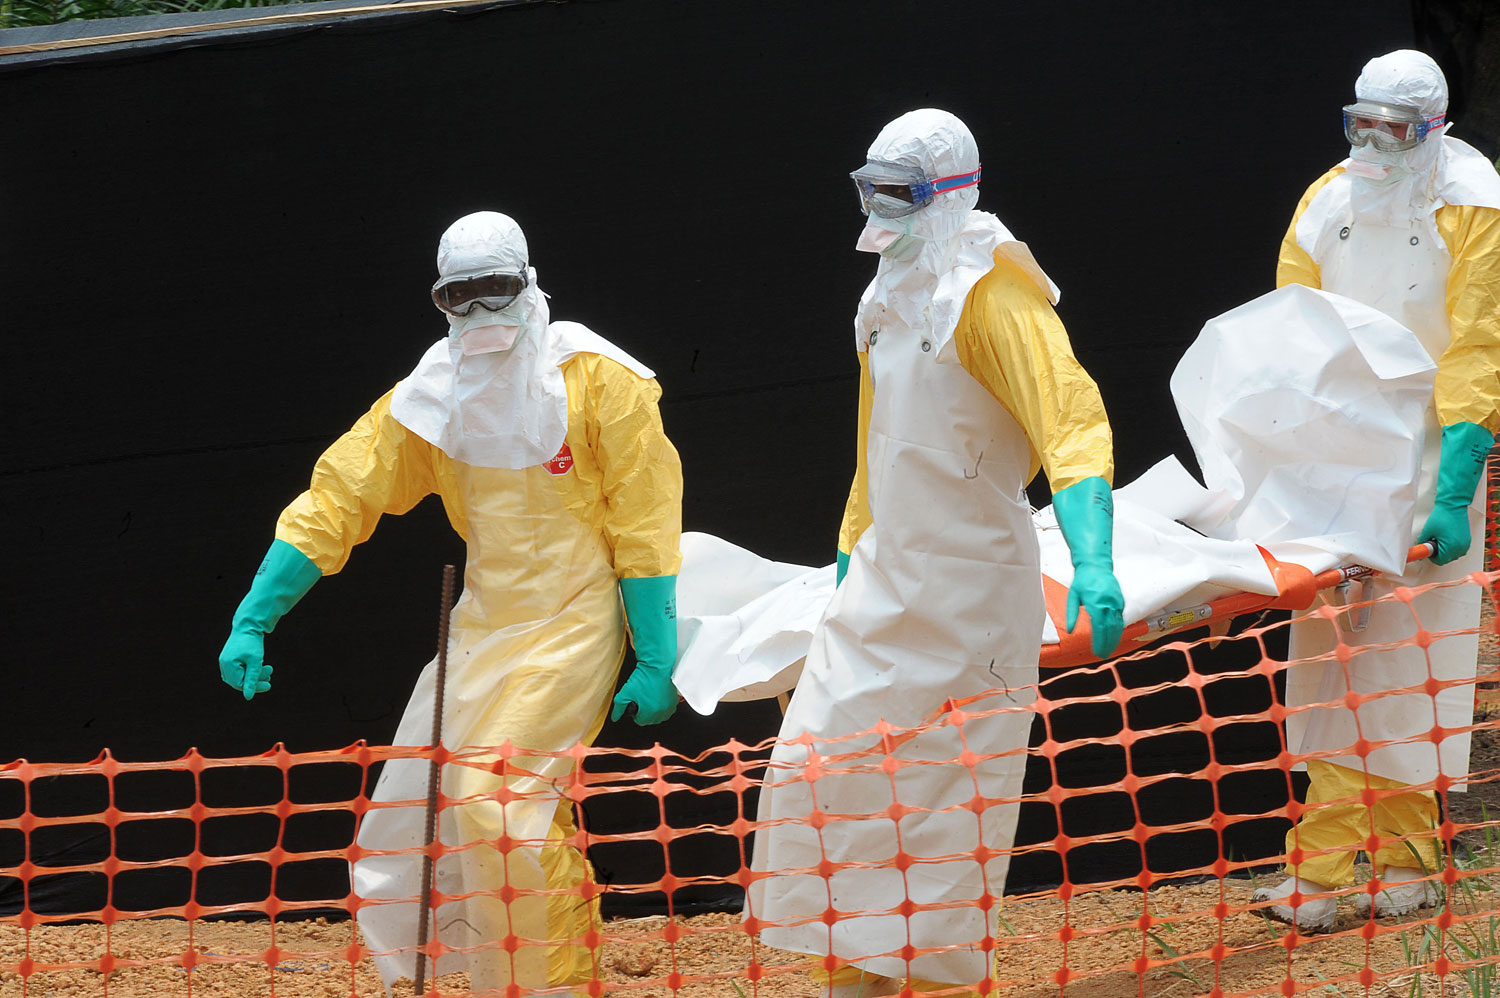 Doctors Without Borders/Médecins Sans Frontières staff carrying the body of a person killed by viral hemorrhagic fever at a center for victims of the Ebola virus in Gueckedou on April 1, 2014.